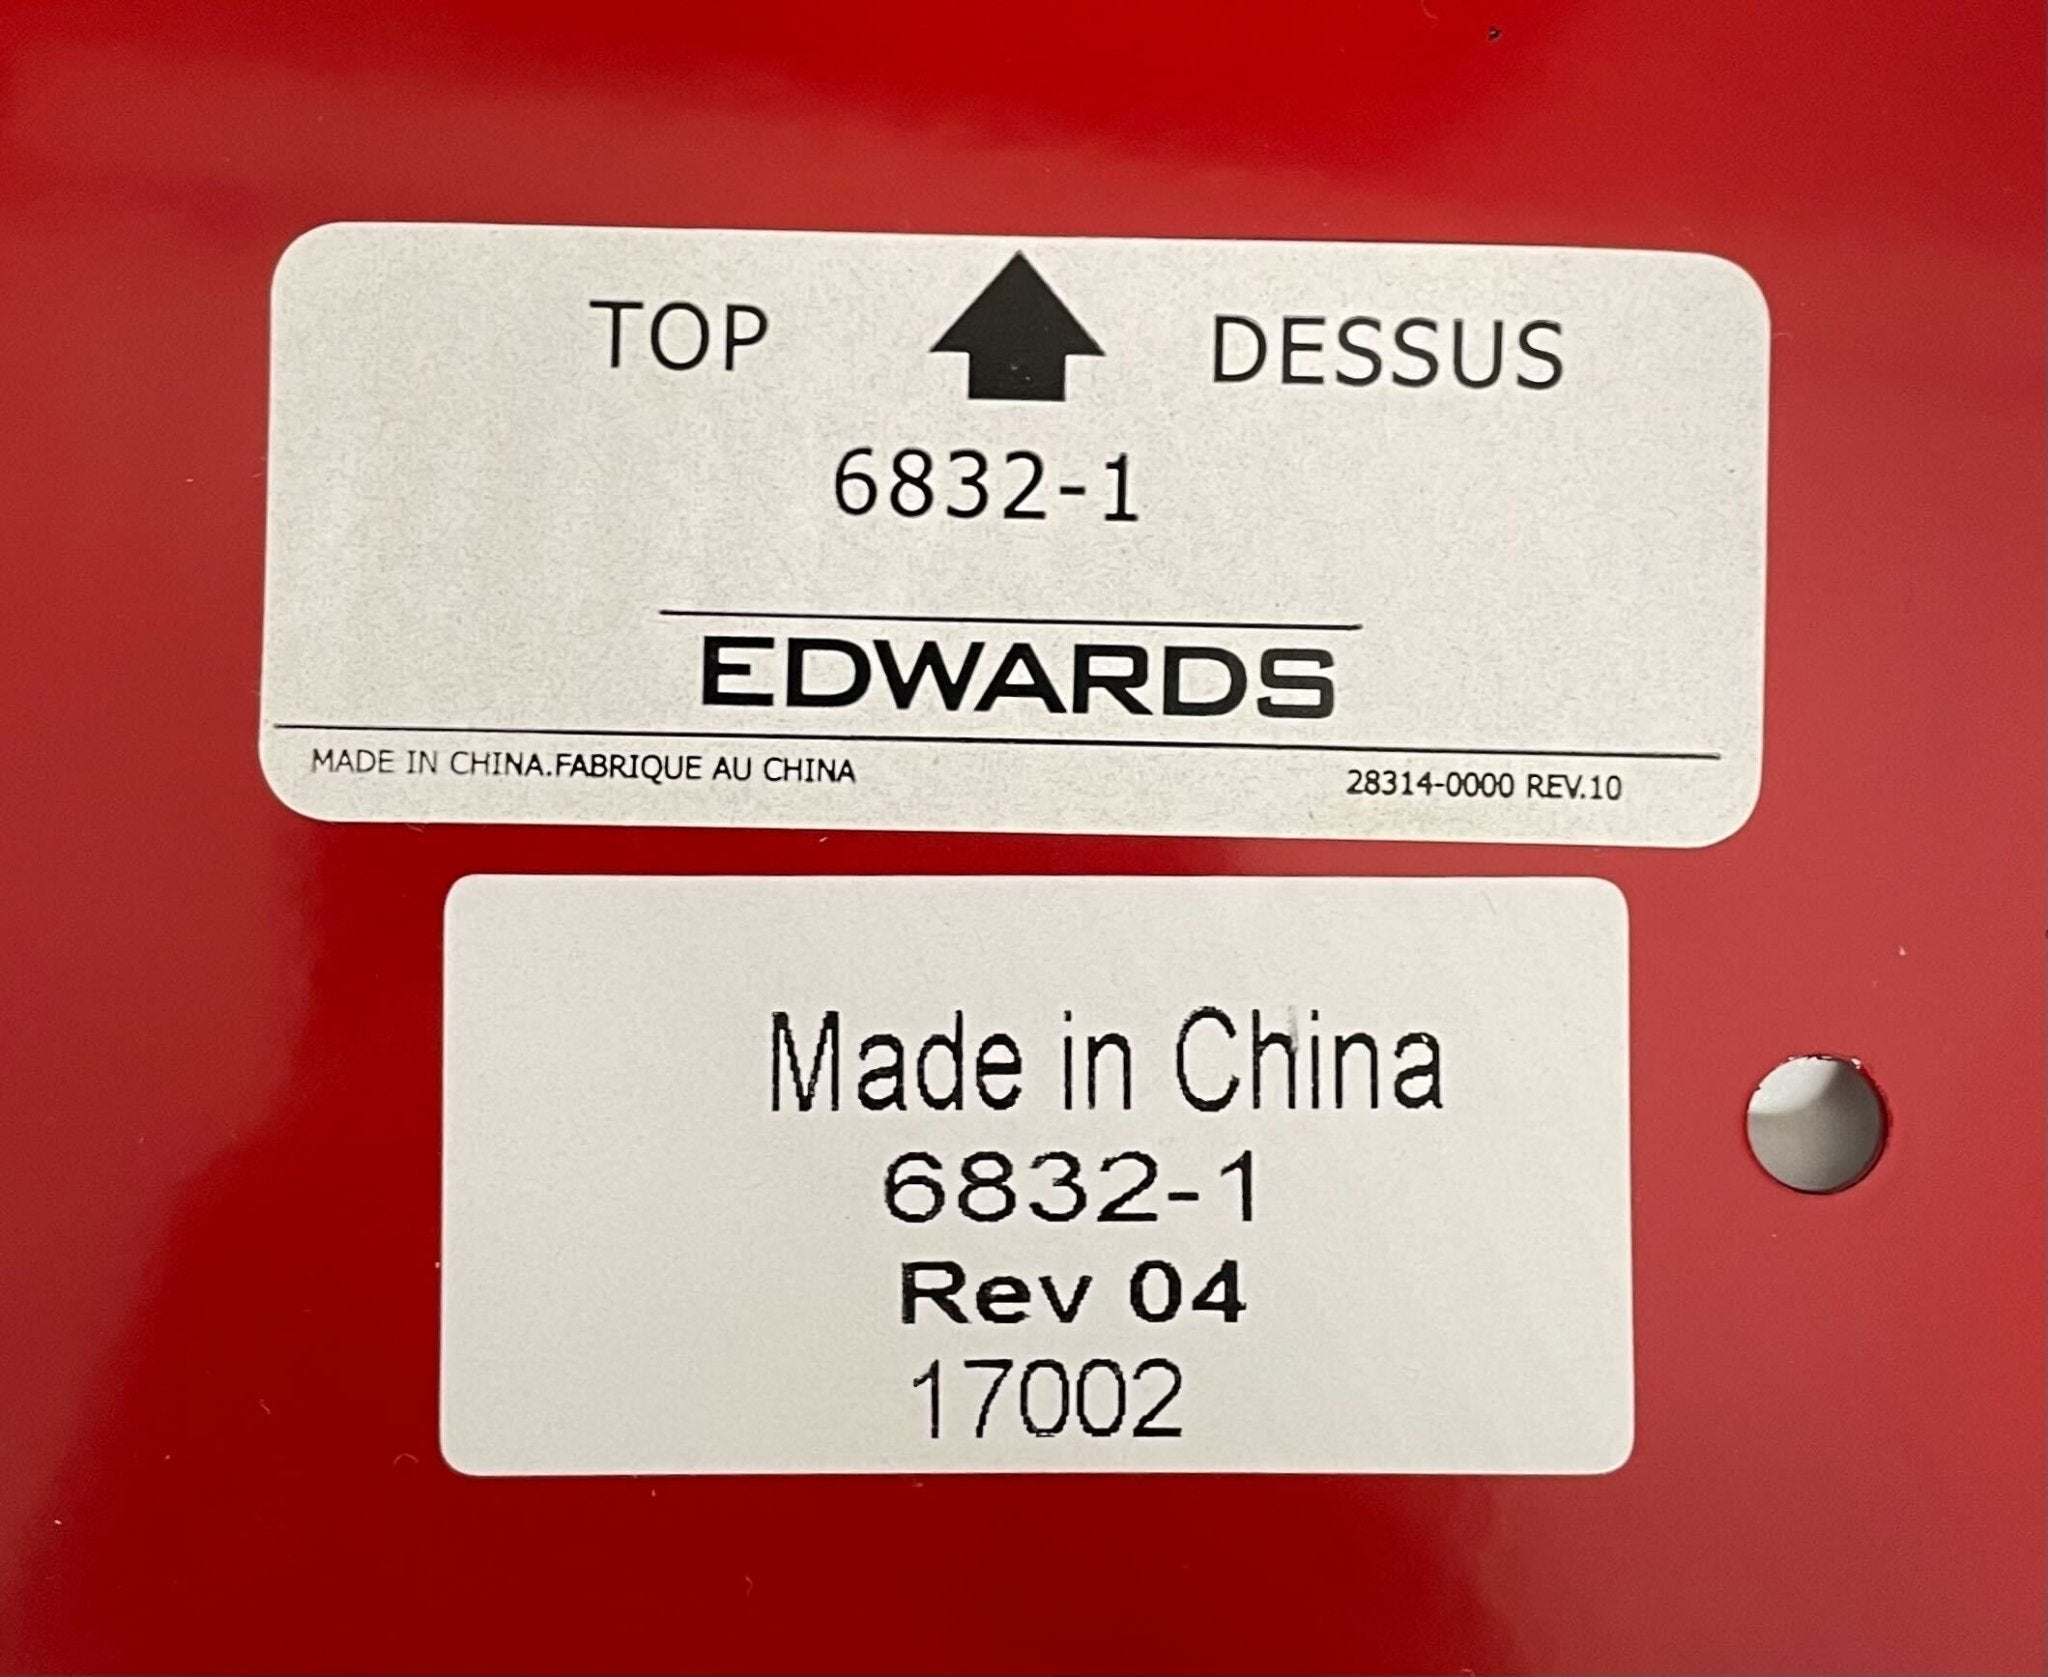 Edwards 6832-1 - The Fire Alarm Supplier